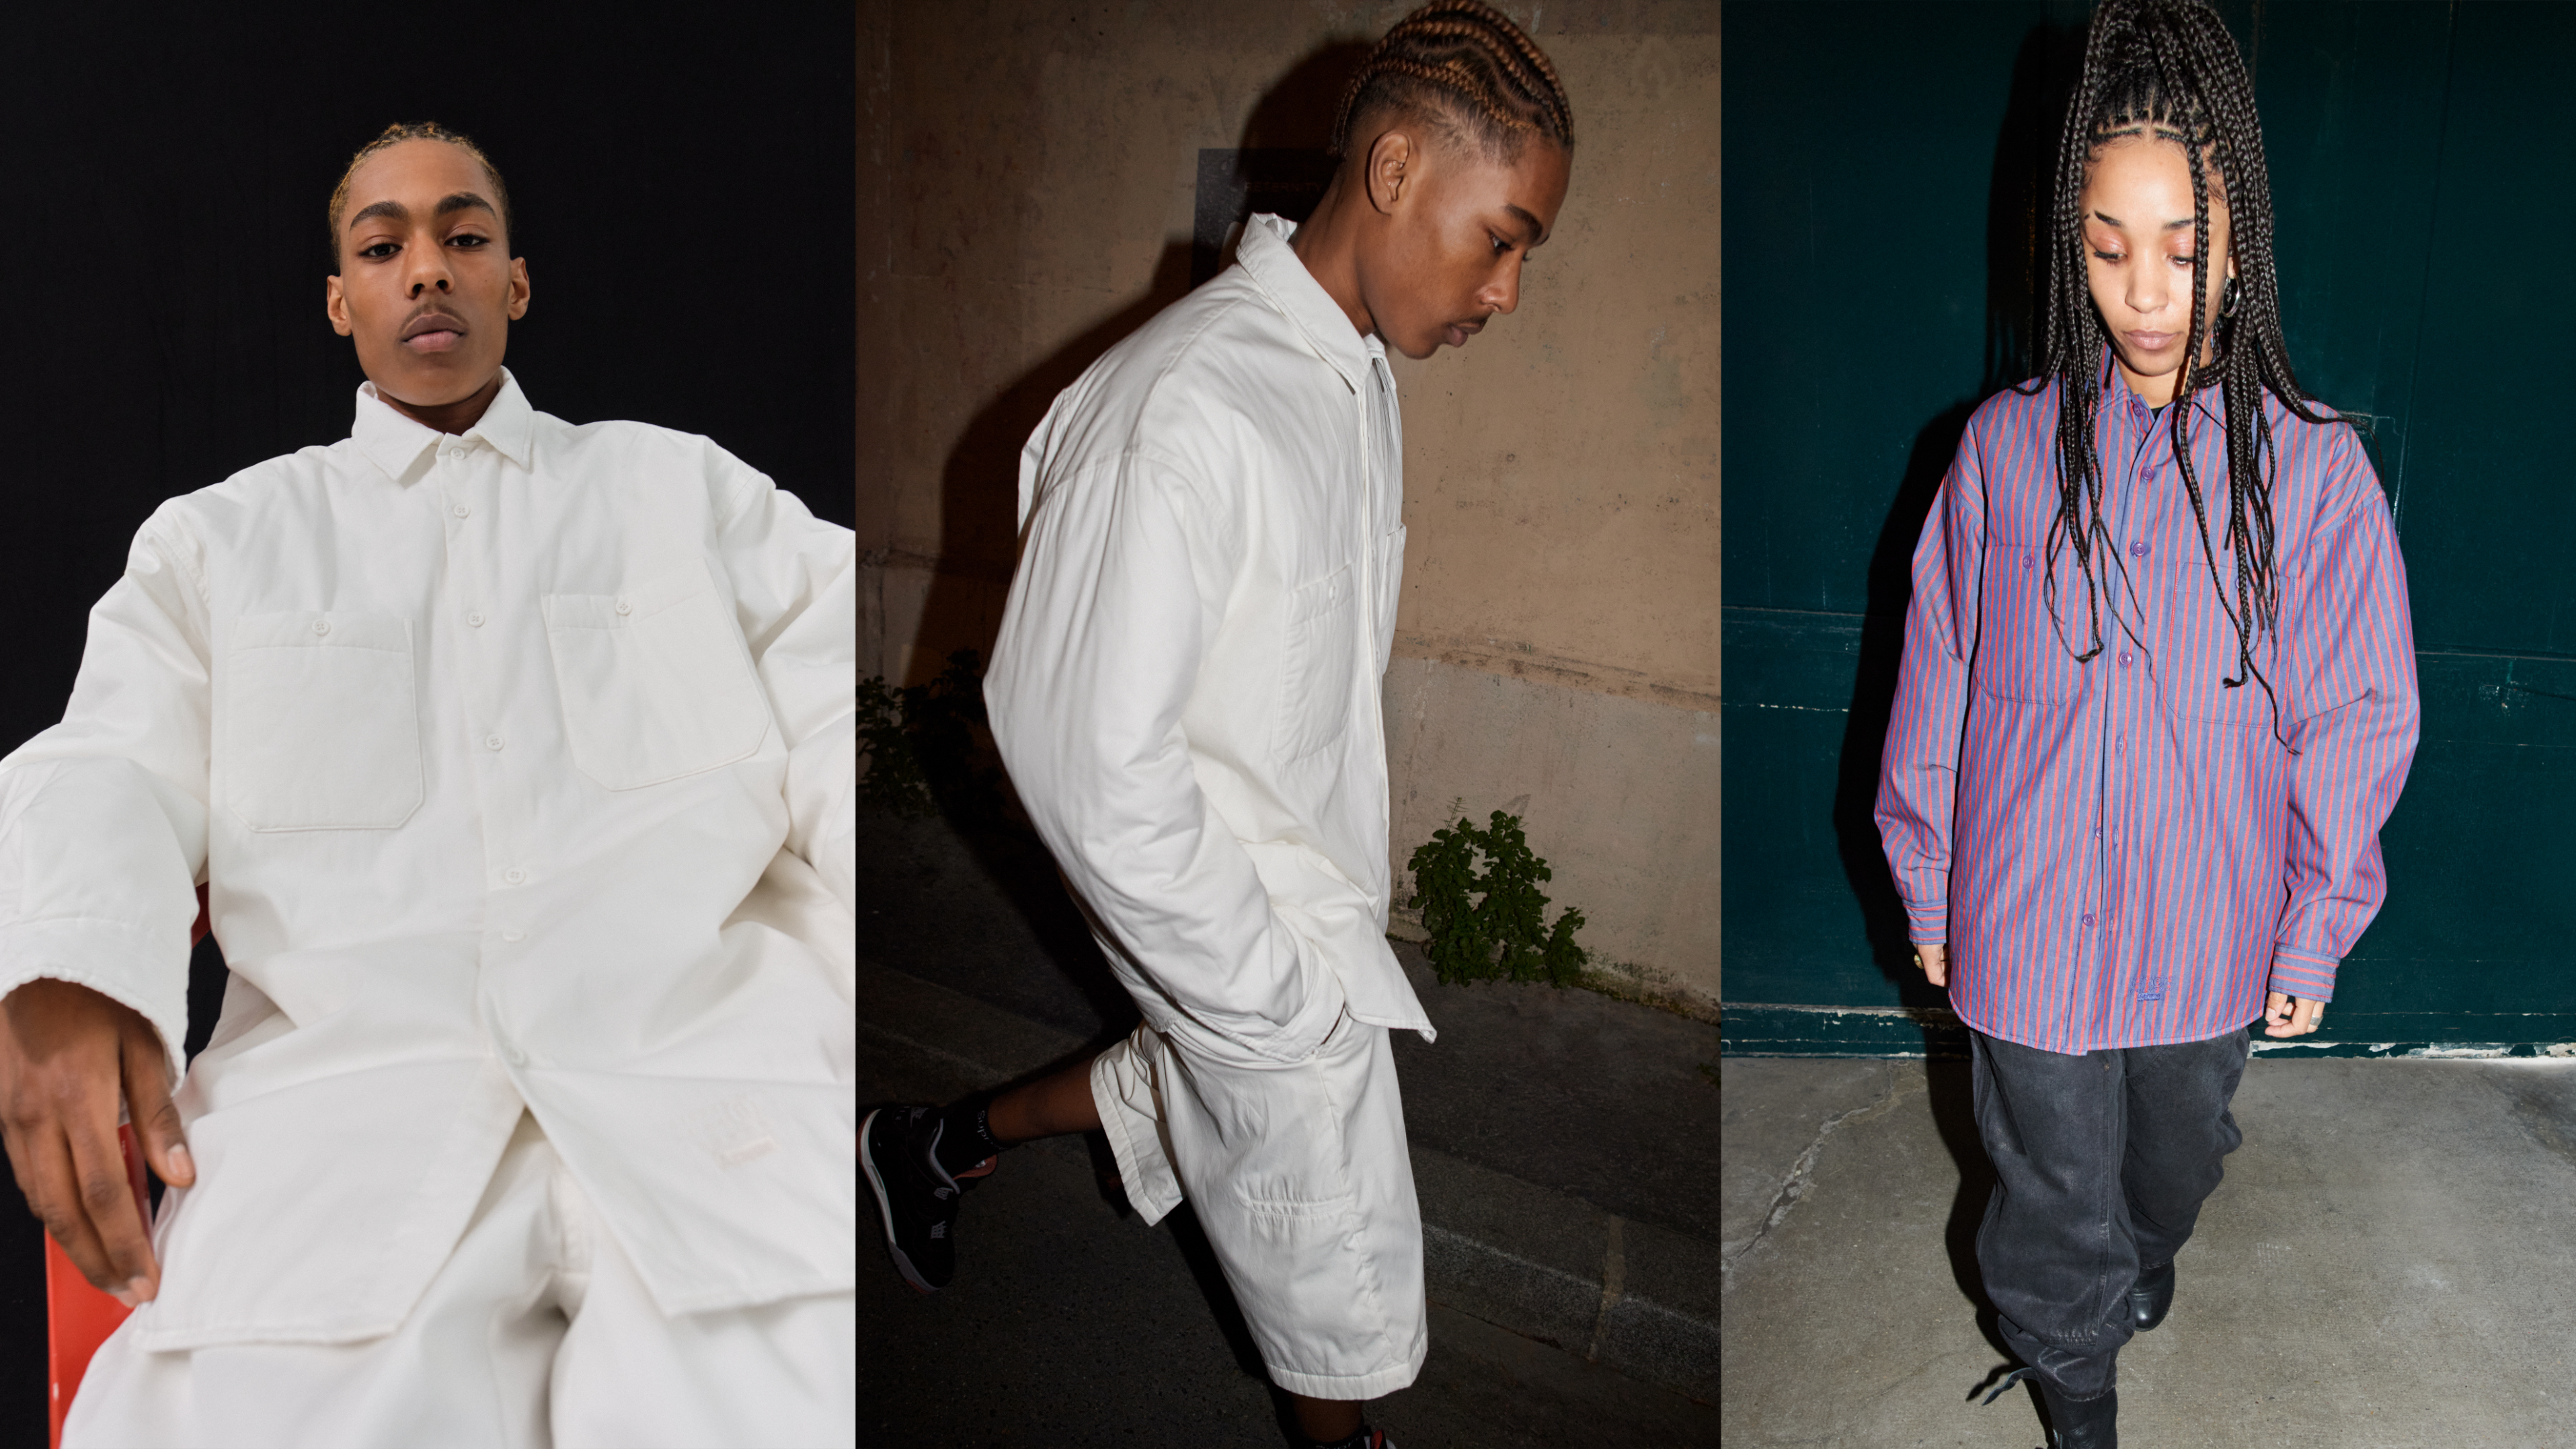 Three poses of a person in a white oversized outfit and another in a striped shirt with baggy pants